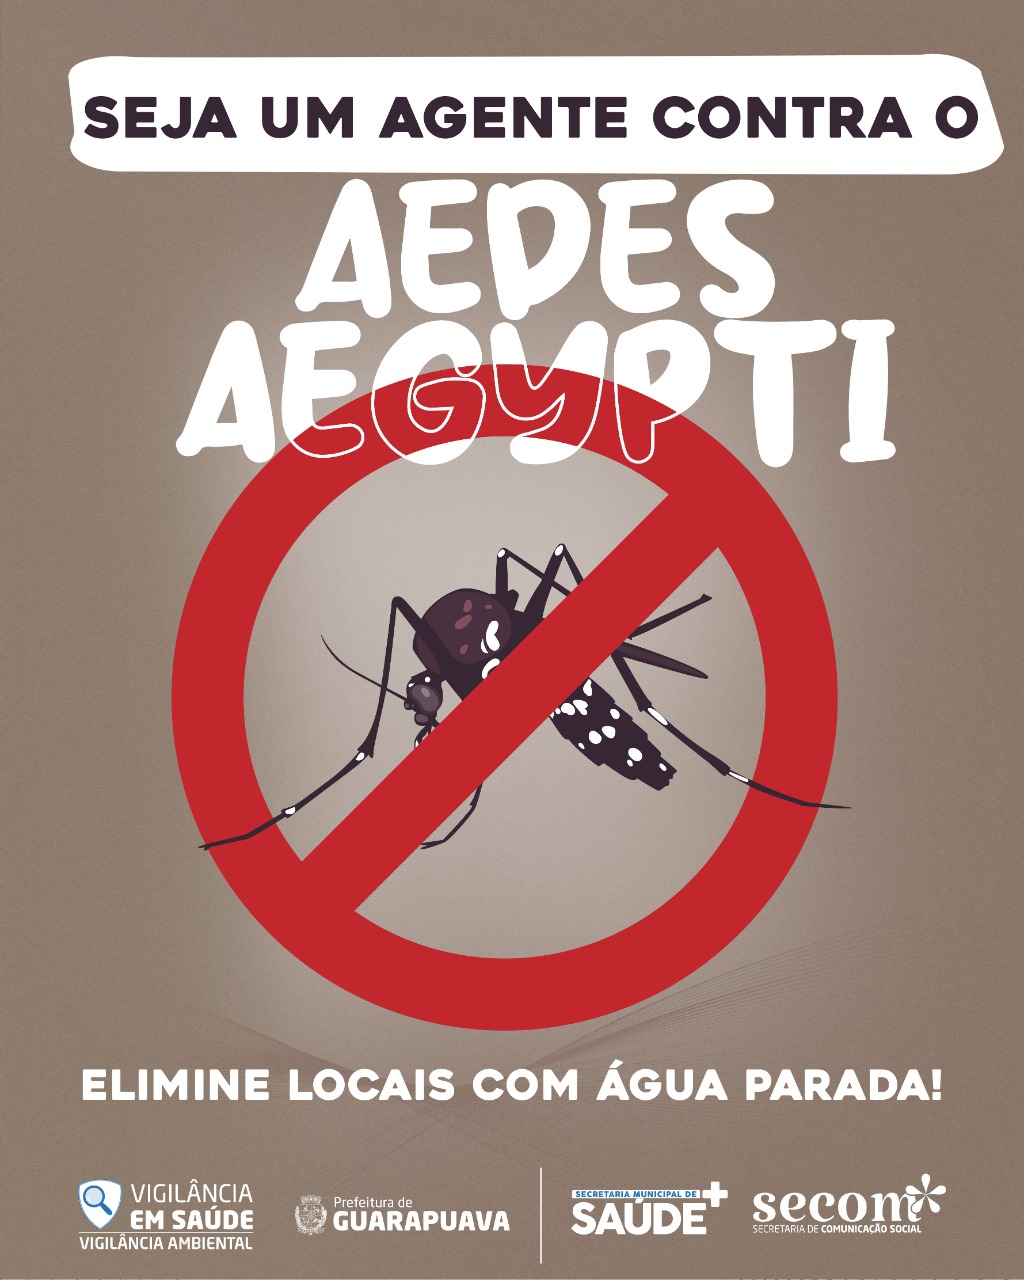 A survey will be conducted on the infestation of Aedes aegypti in Guarapuava